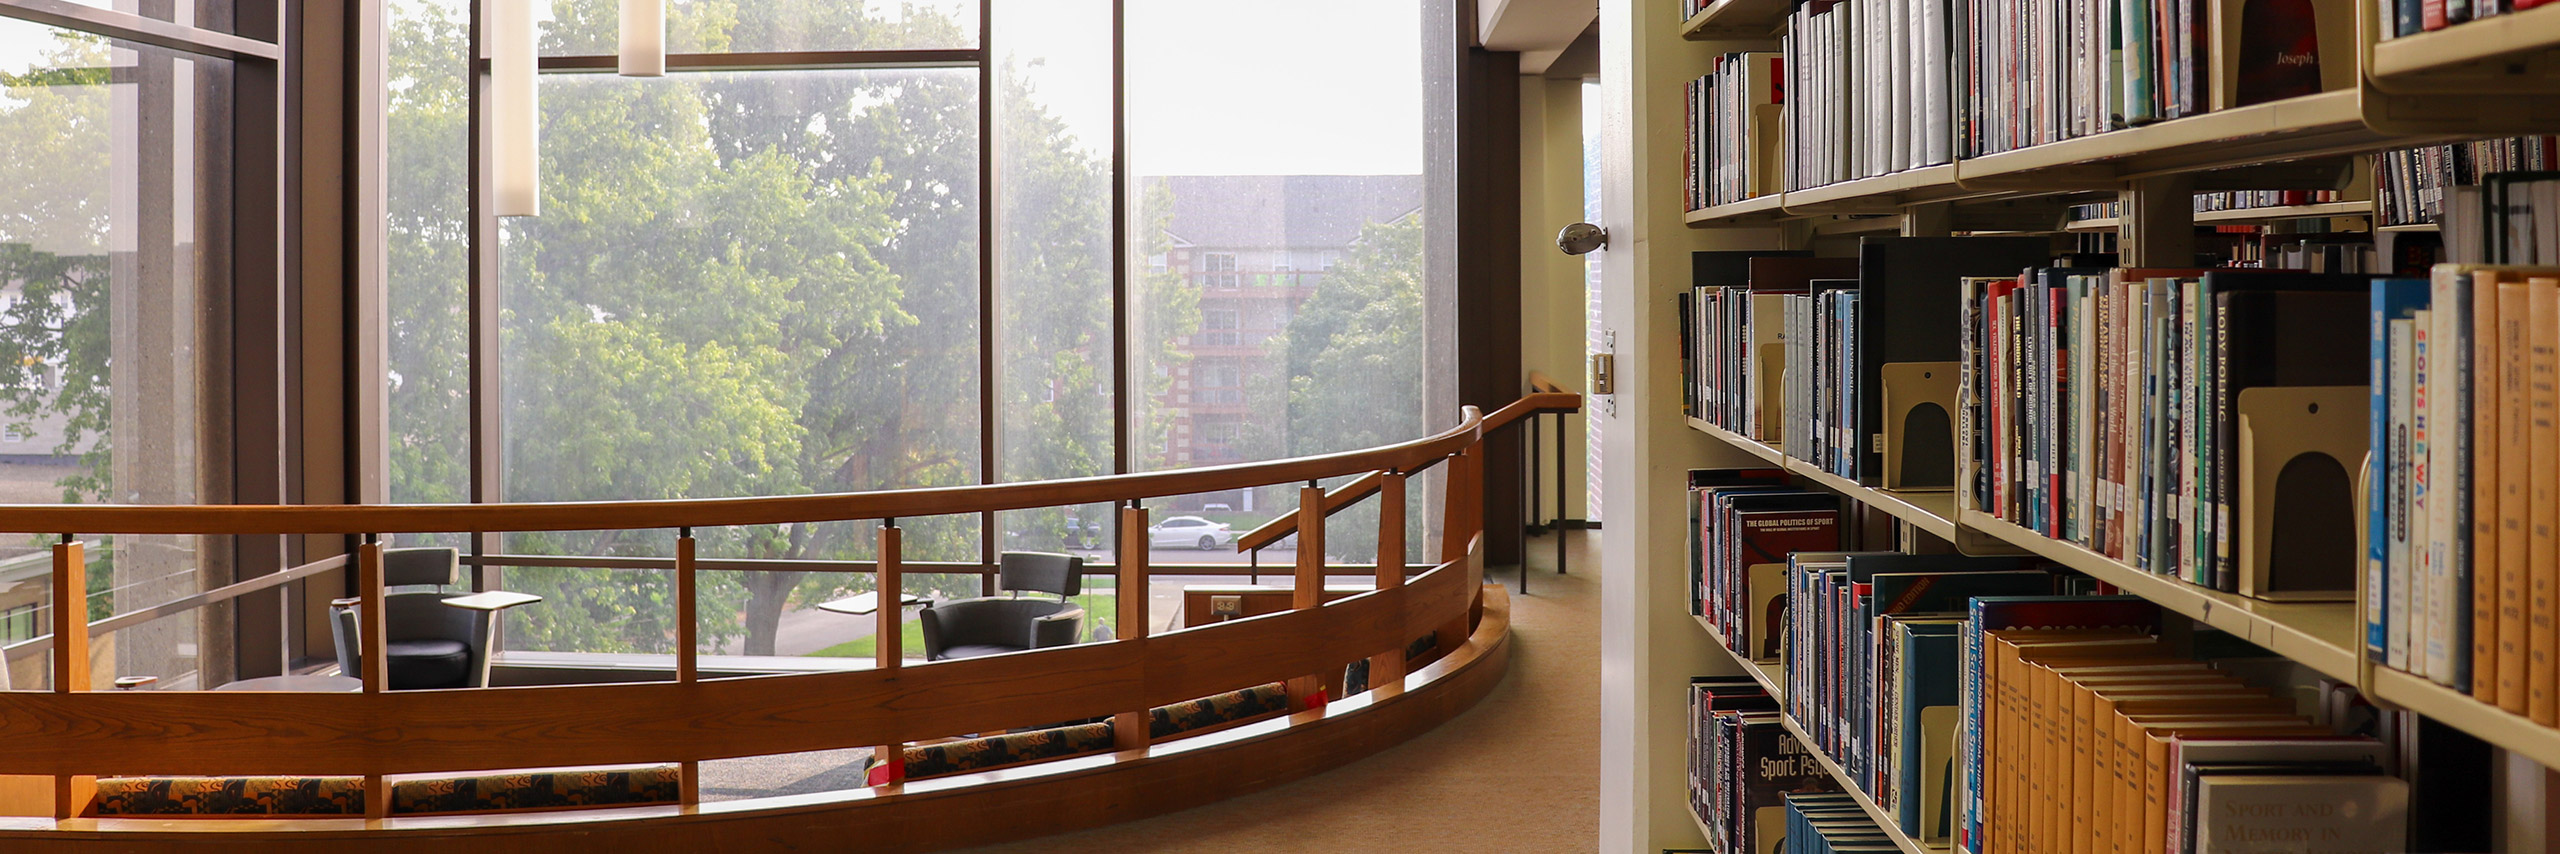 An interior view of Milner Library reveals rows of bookshelves filled with a diverse collection of books.